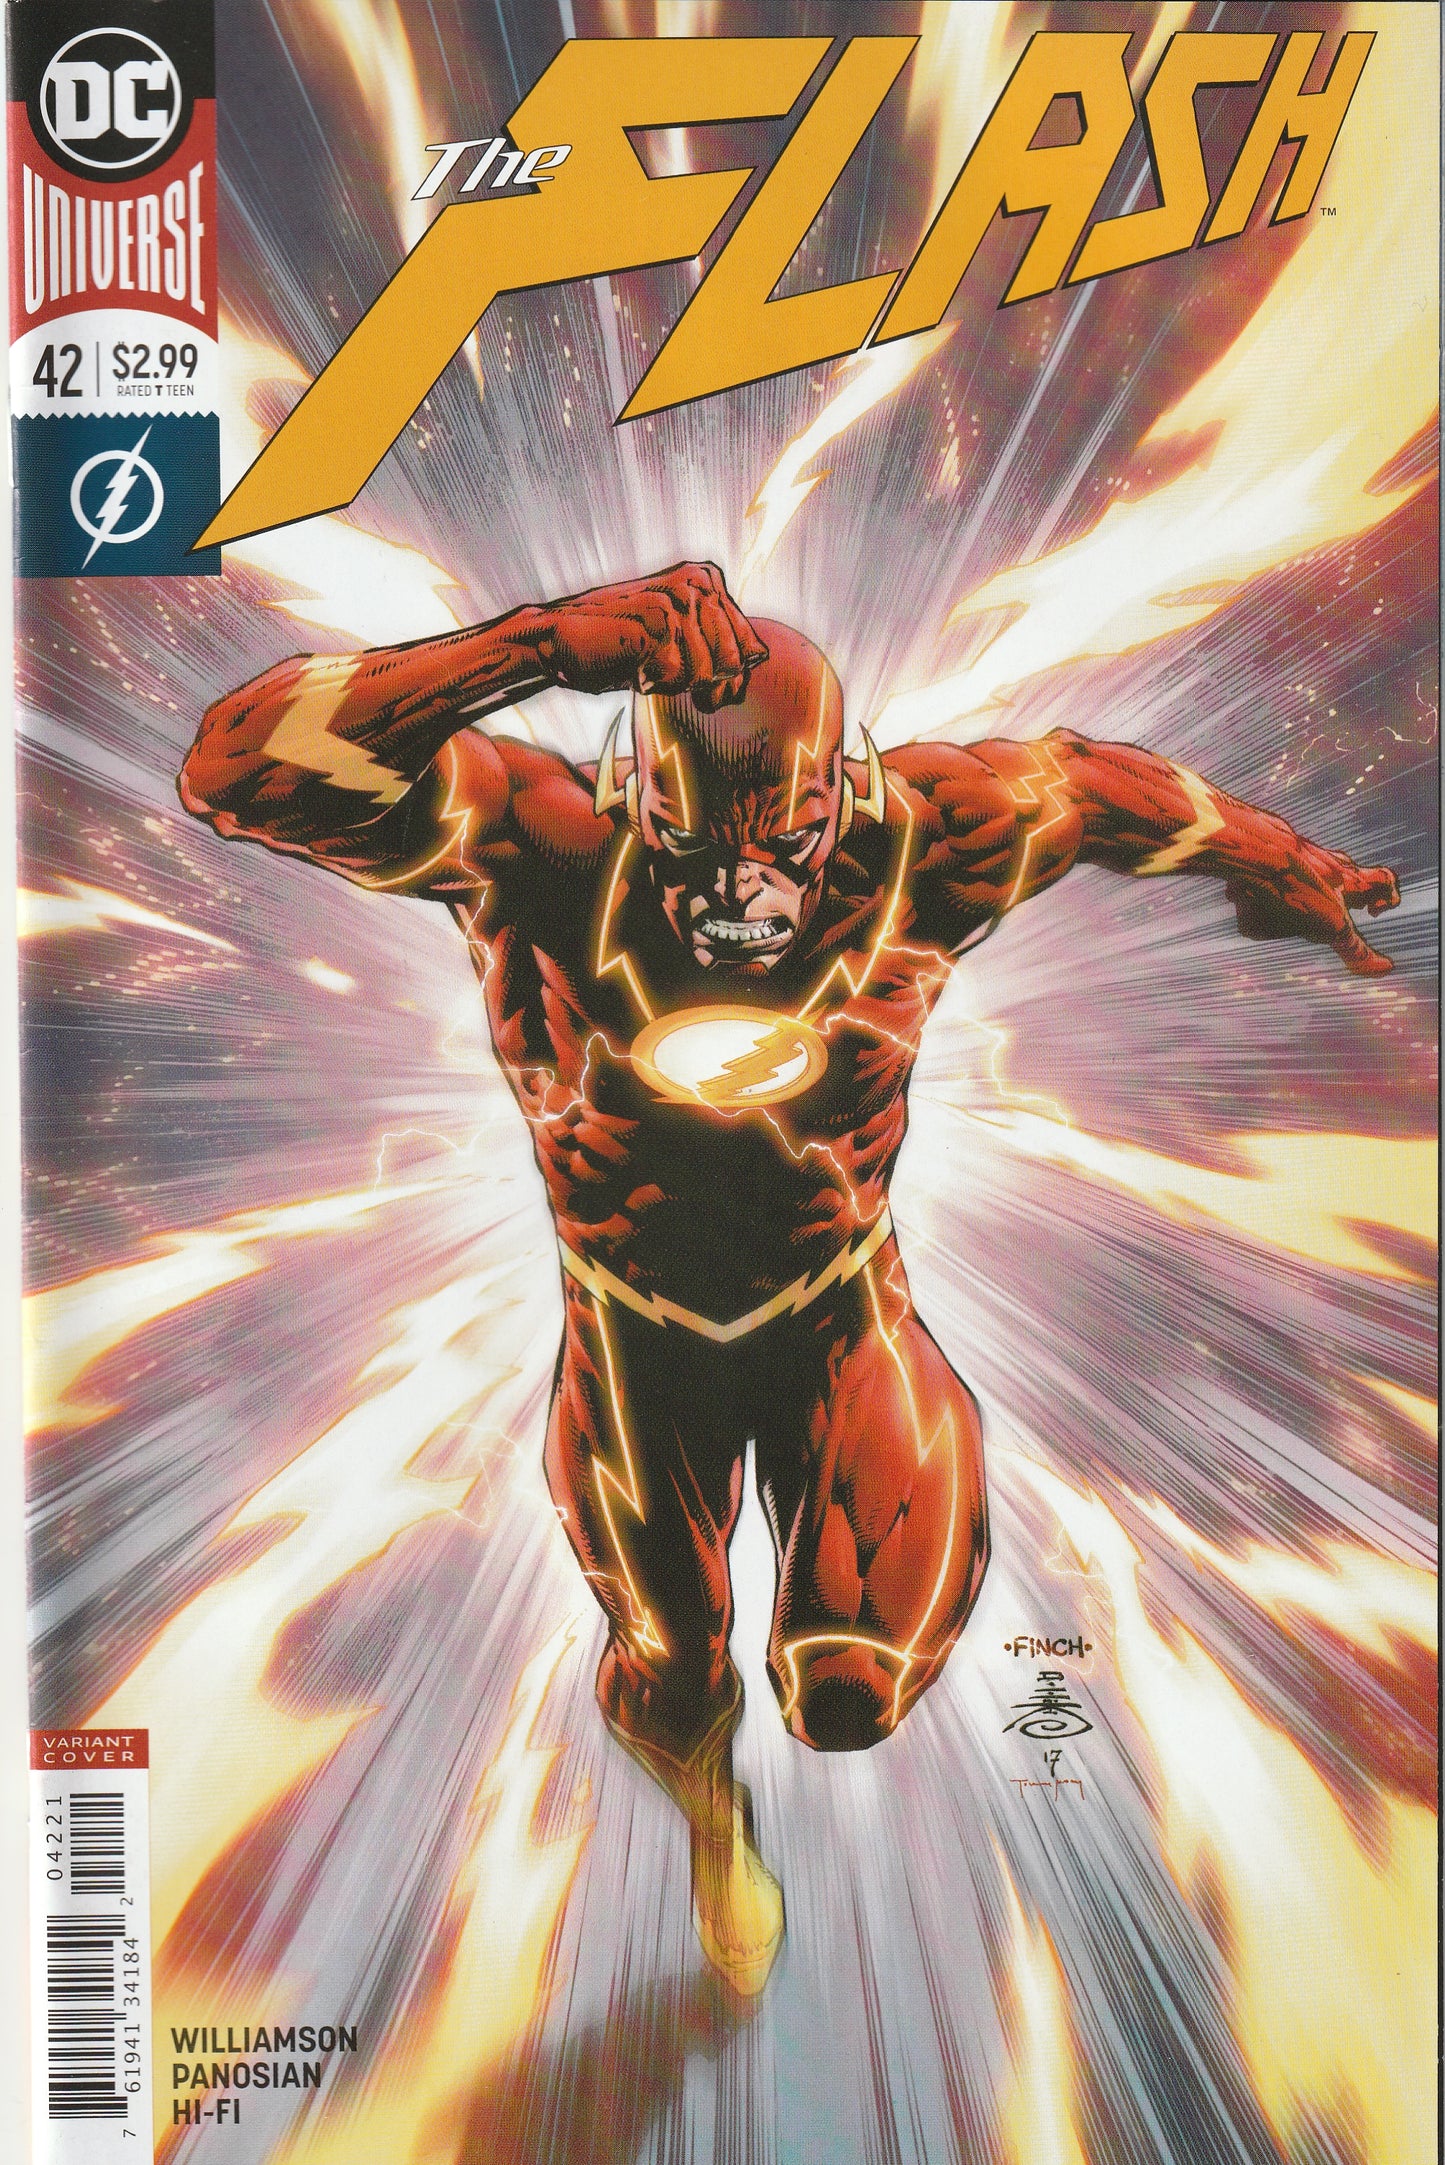 The Flash - #42 (2018) - David Finch & Danny Miki Variant Cover